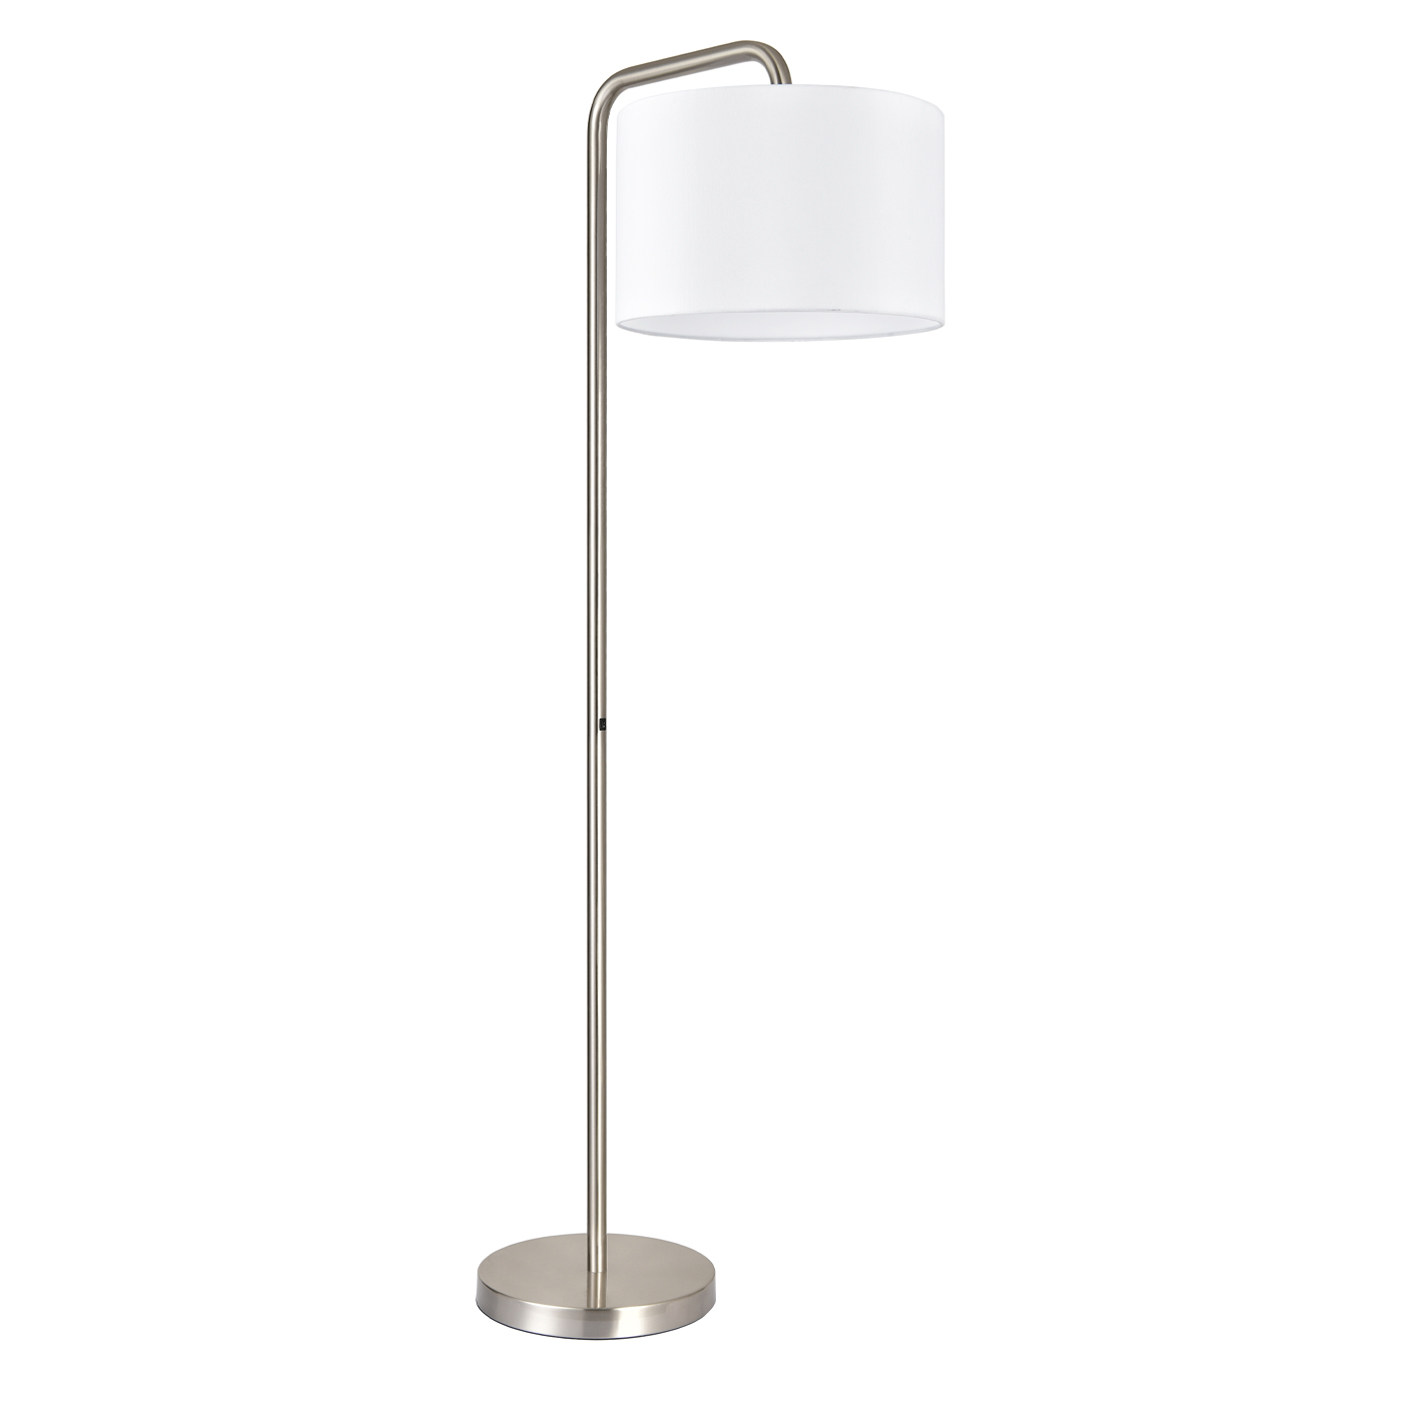 Floor Lamp Brushed Nickel With One Switch